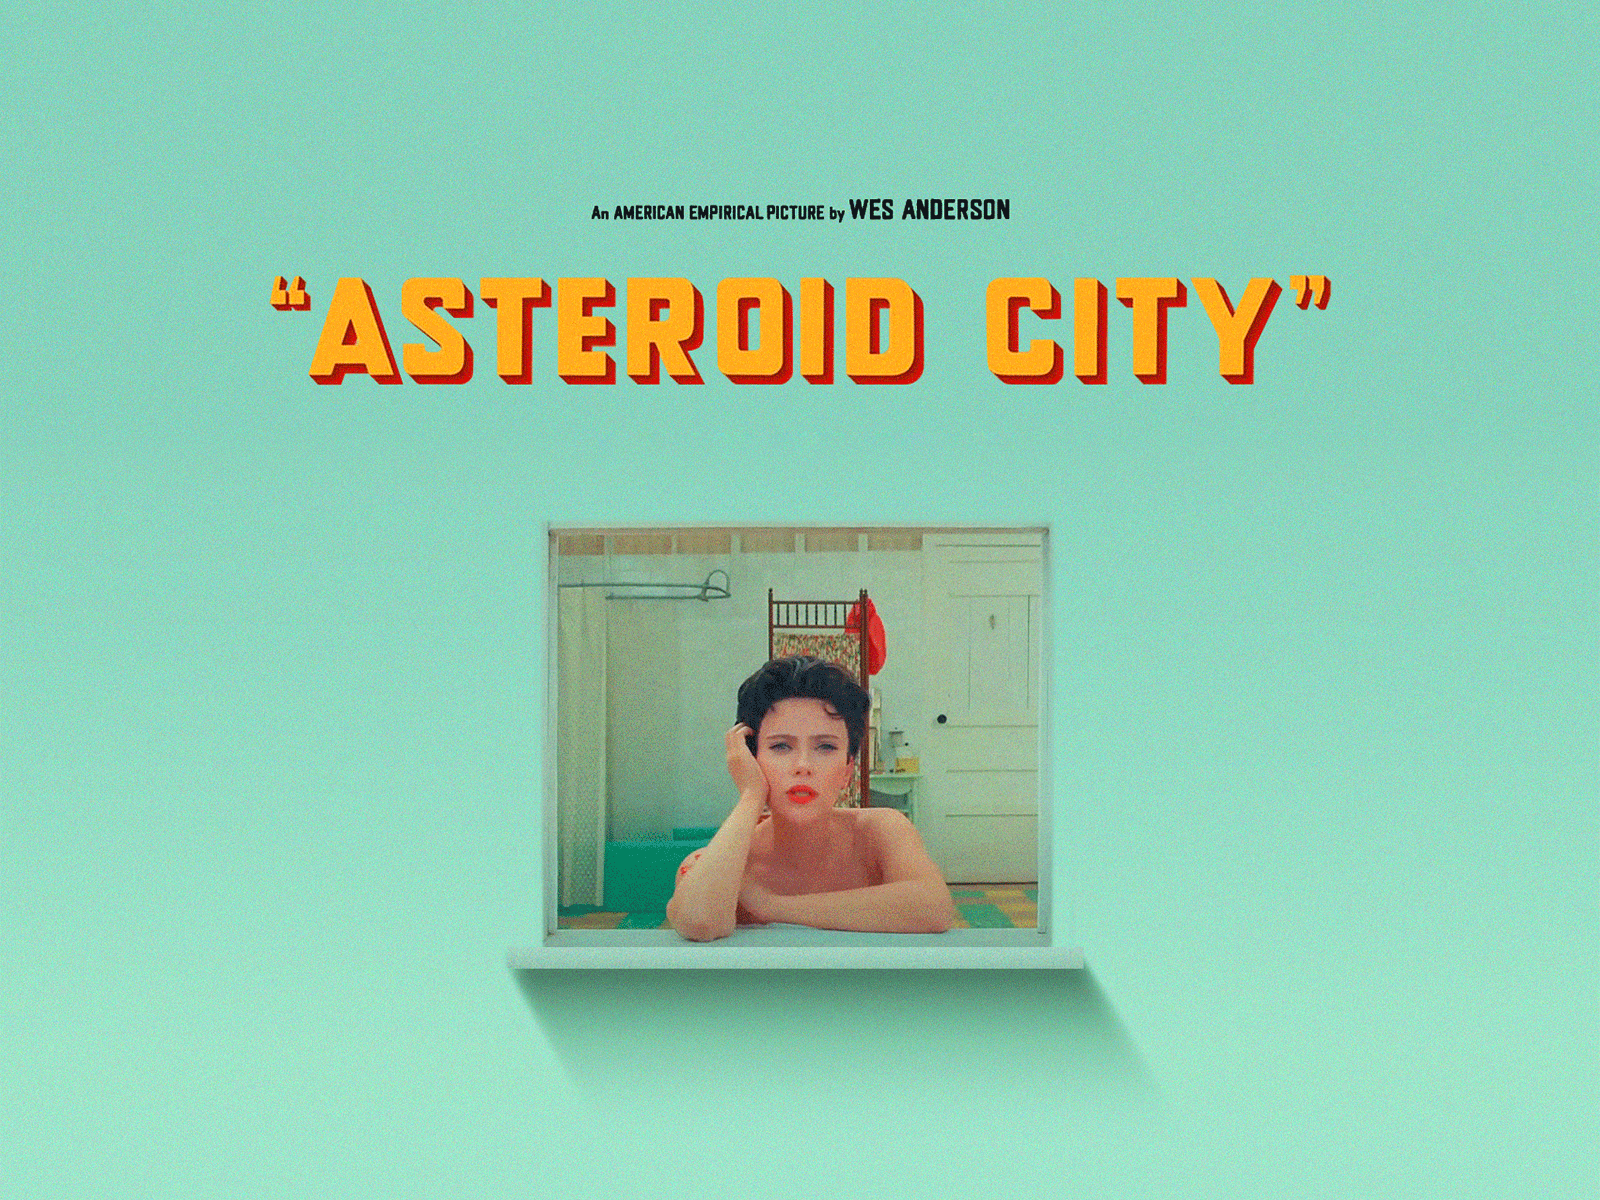 Wes Anderson’s ‘Asteroid City’ asteroid city film film poster key art movie movie poster movie posters movies poster poster design posters wes anderson